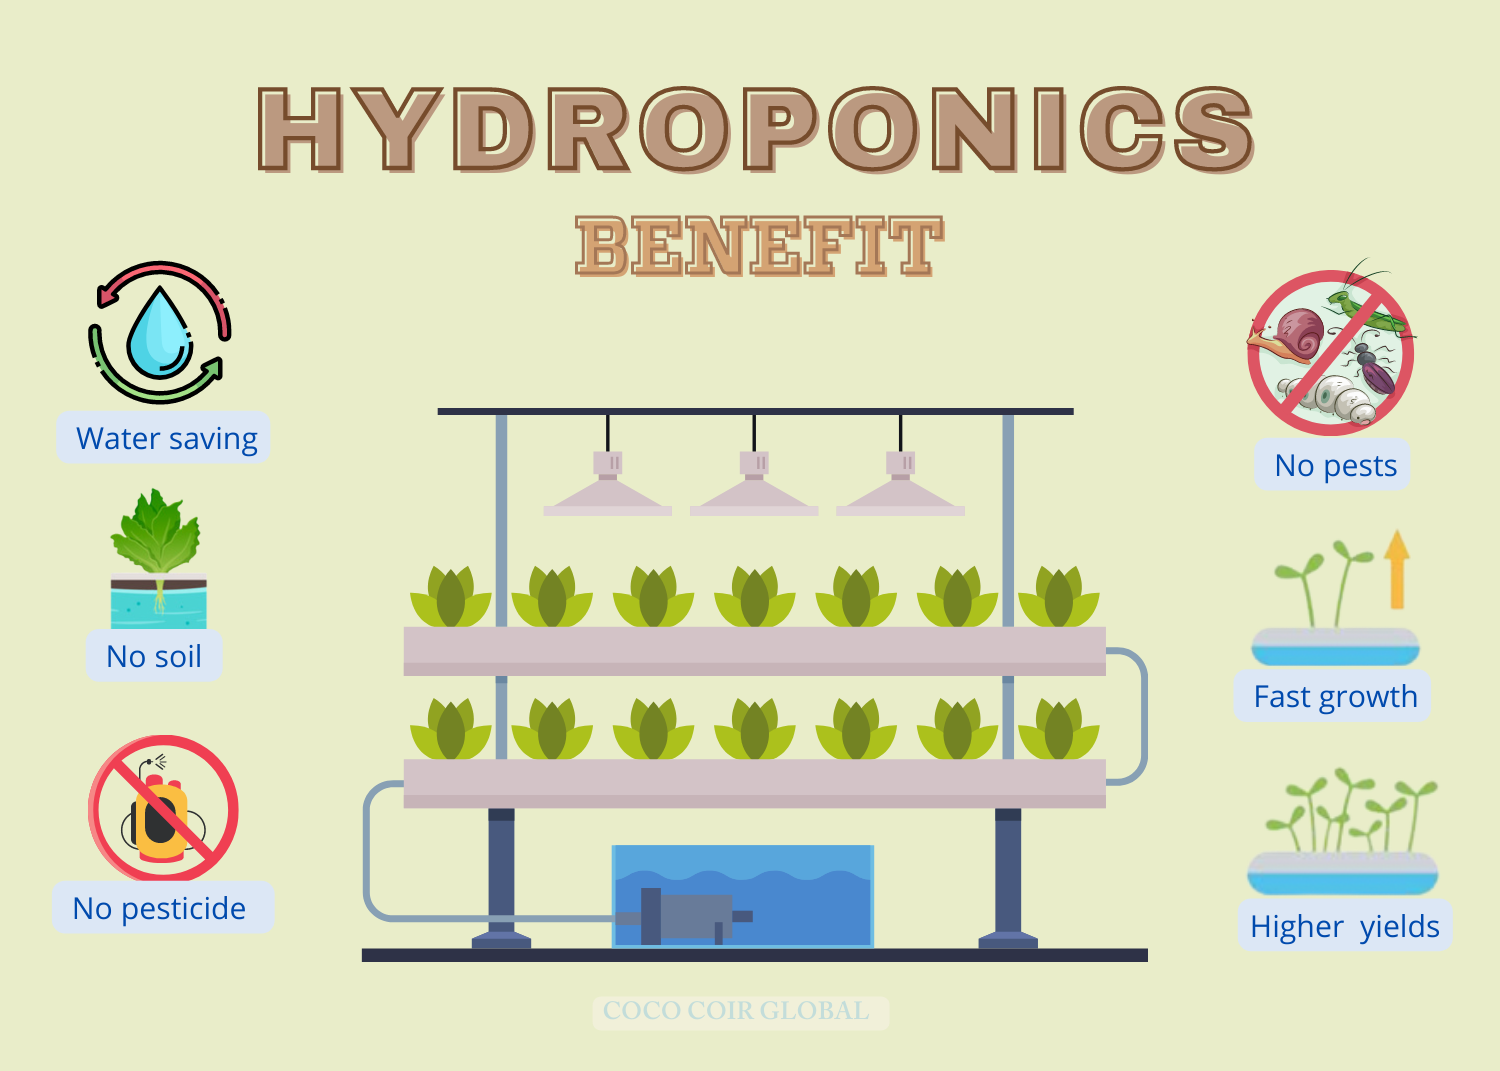 Coco Coir for Hydroponic: Advantages Of Using Coco Coir